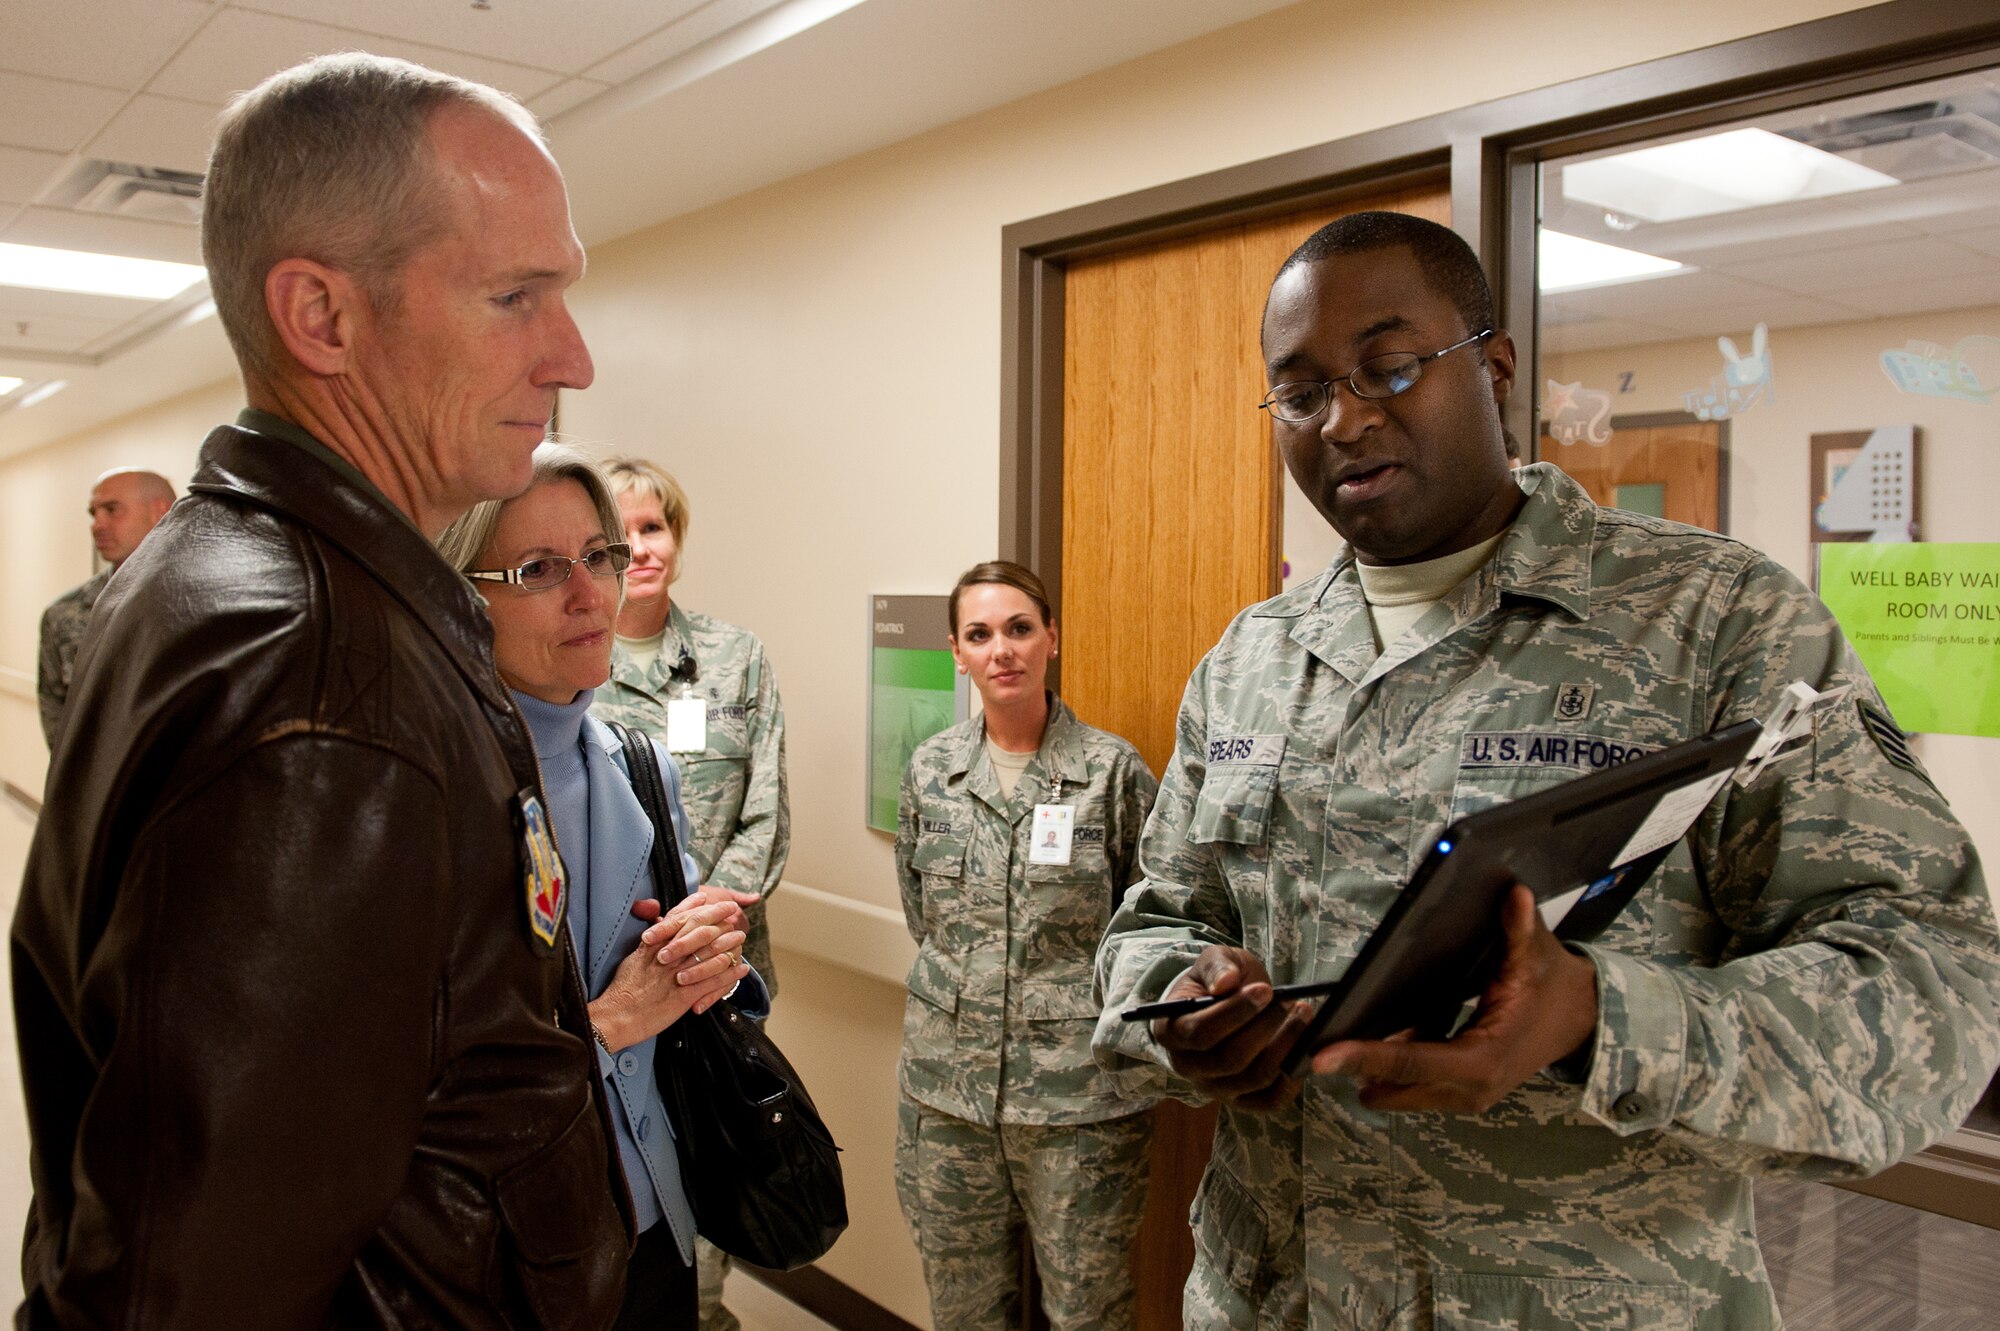 Air Force Staff Sgt. Kevin Spears, 28th Medical Operations Squadron information systems NCO in charge, explains how the 28th Medical Group and providers use a tablet to document a patient’s care during an exam to Gen. Mike Hostage, commander of Air Combat Command, and his wife, Kathy, in the clinic at Ellsworth Air Force Base, S.D., Oct. 10, 2012. Hostage and his wife toured the facility and viewed some of its modern additions including a mobile storage device for the supply room that saves more than 30 percent in the amount of space used. (U.S. Air Force photo by Airmen 1st Class Kate Thornton-Maurer/ Released)